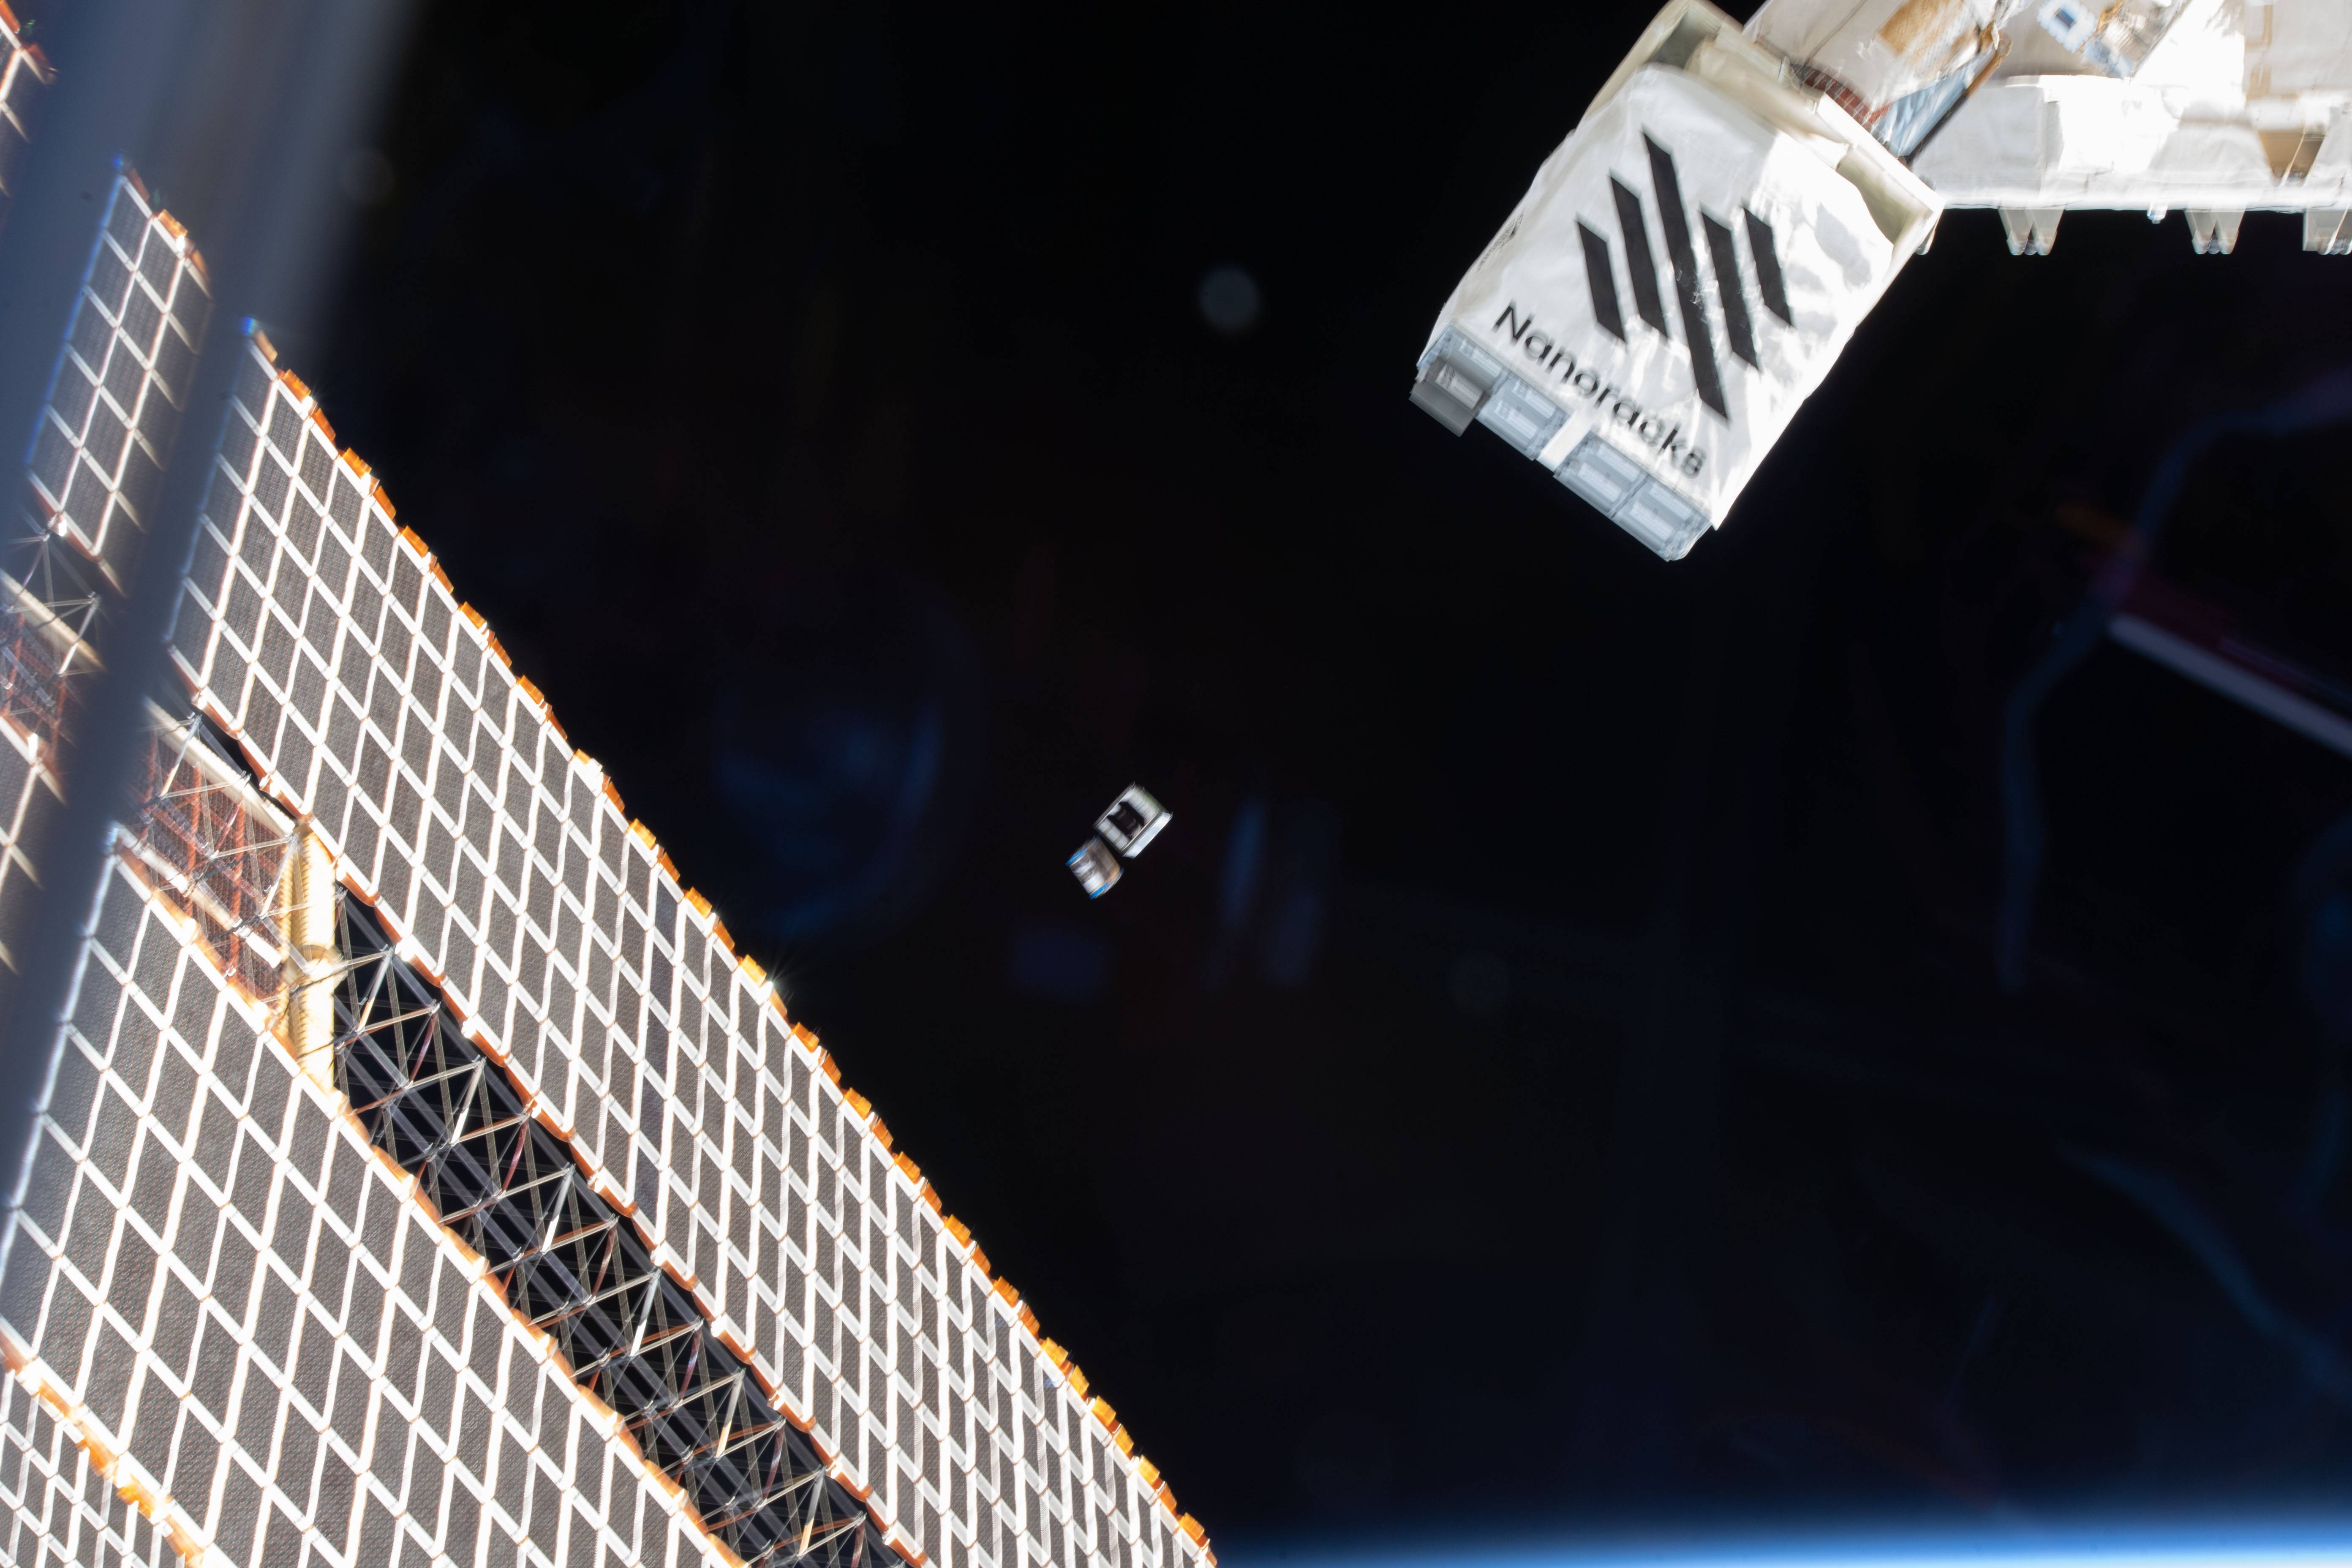 GASPACS is deployed from the ISS